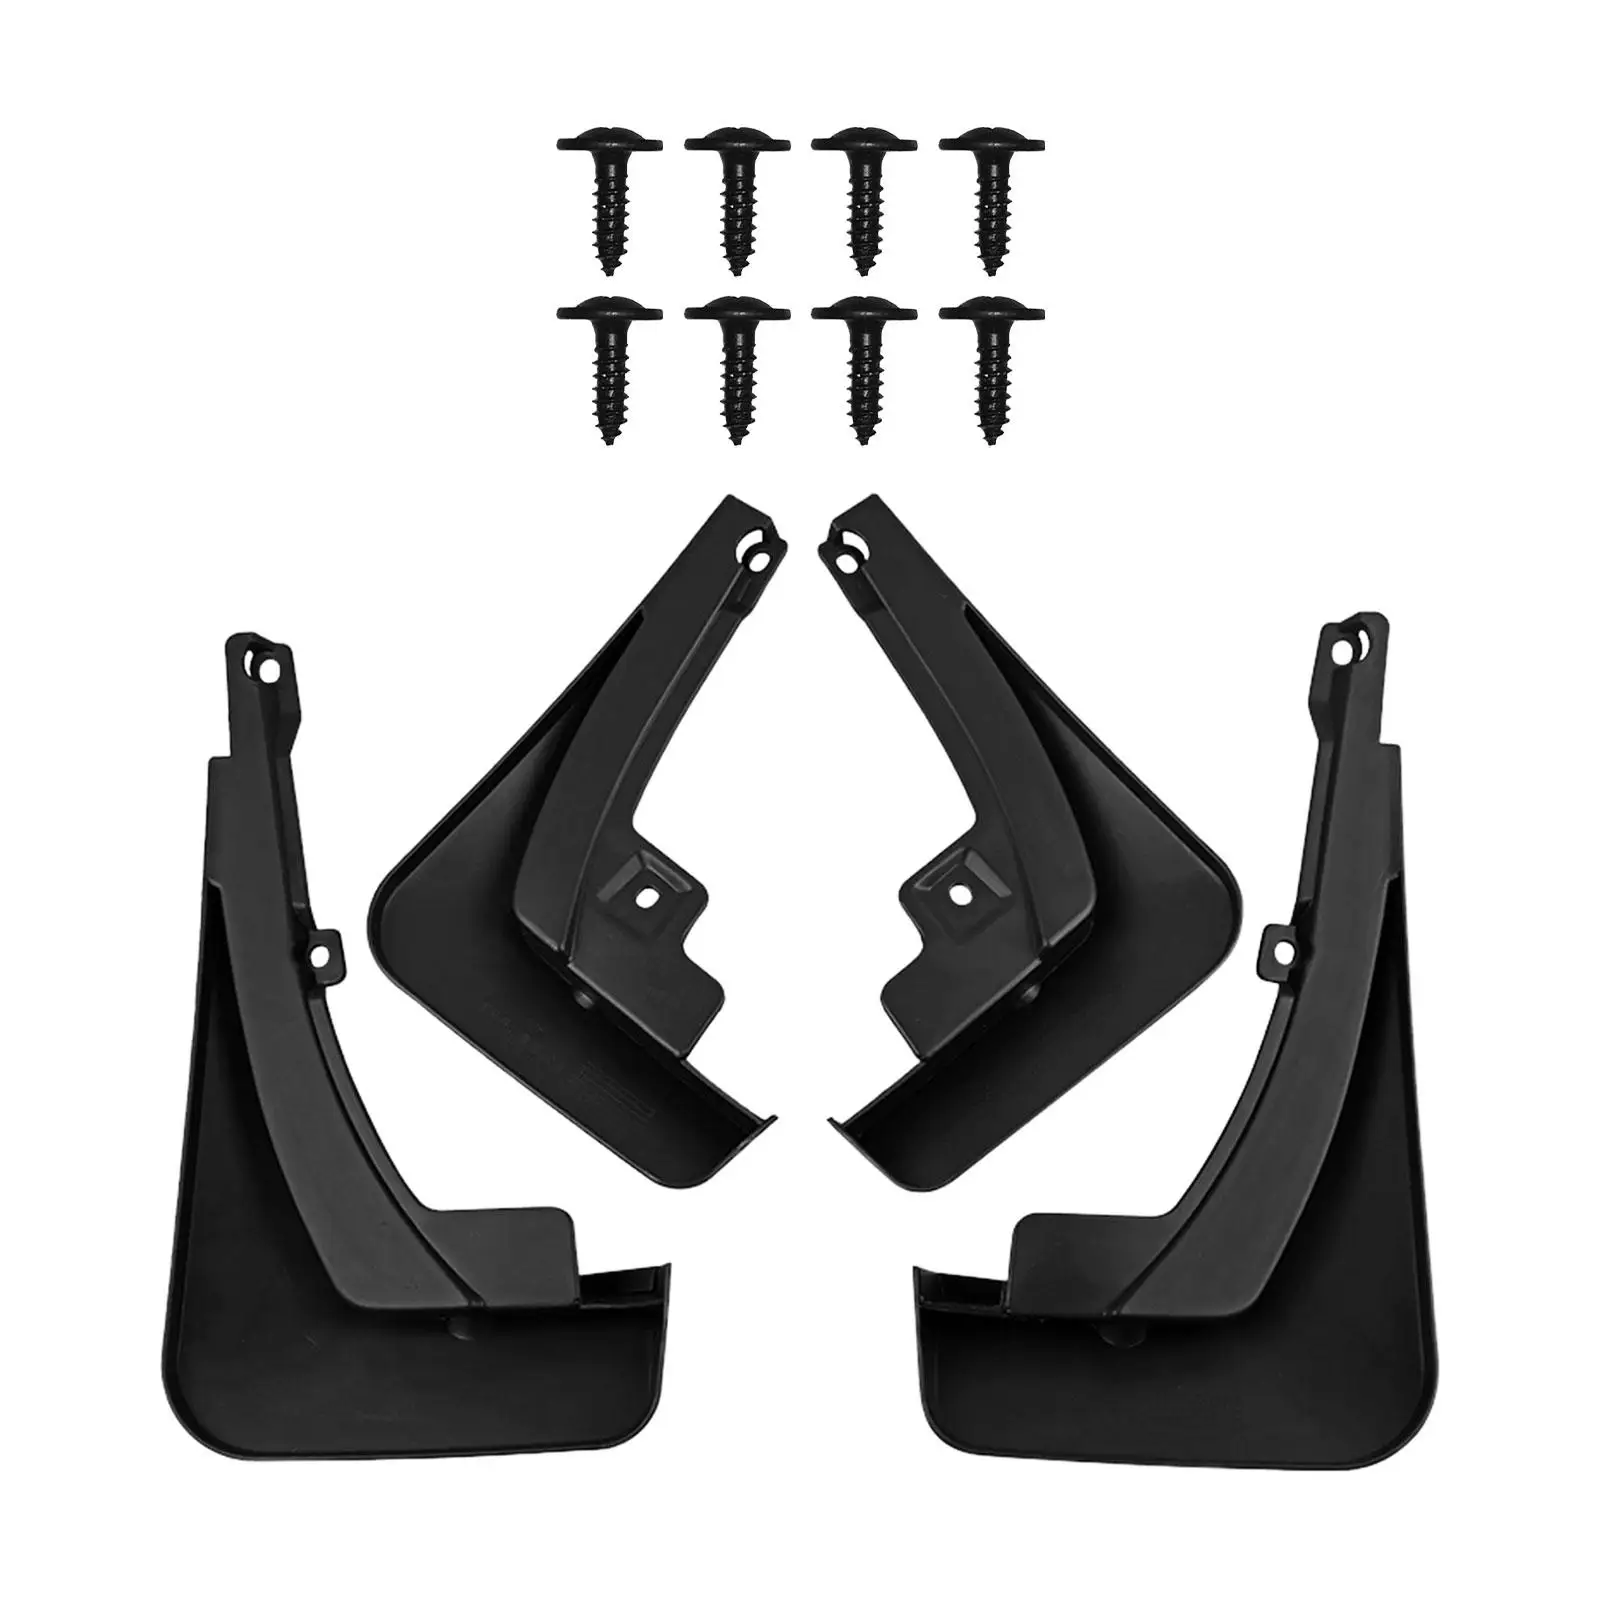 4 Pieces Car Mud Flaps Car Fenders with 8 Screws Mudguard for Geely Monjaro after 2021 Replacement Part Easy Installation